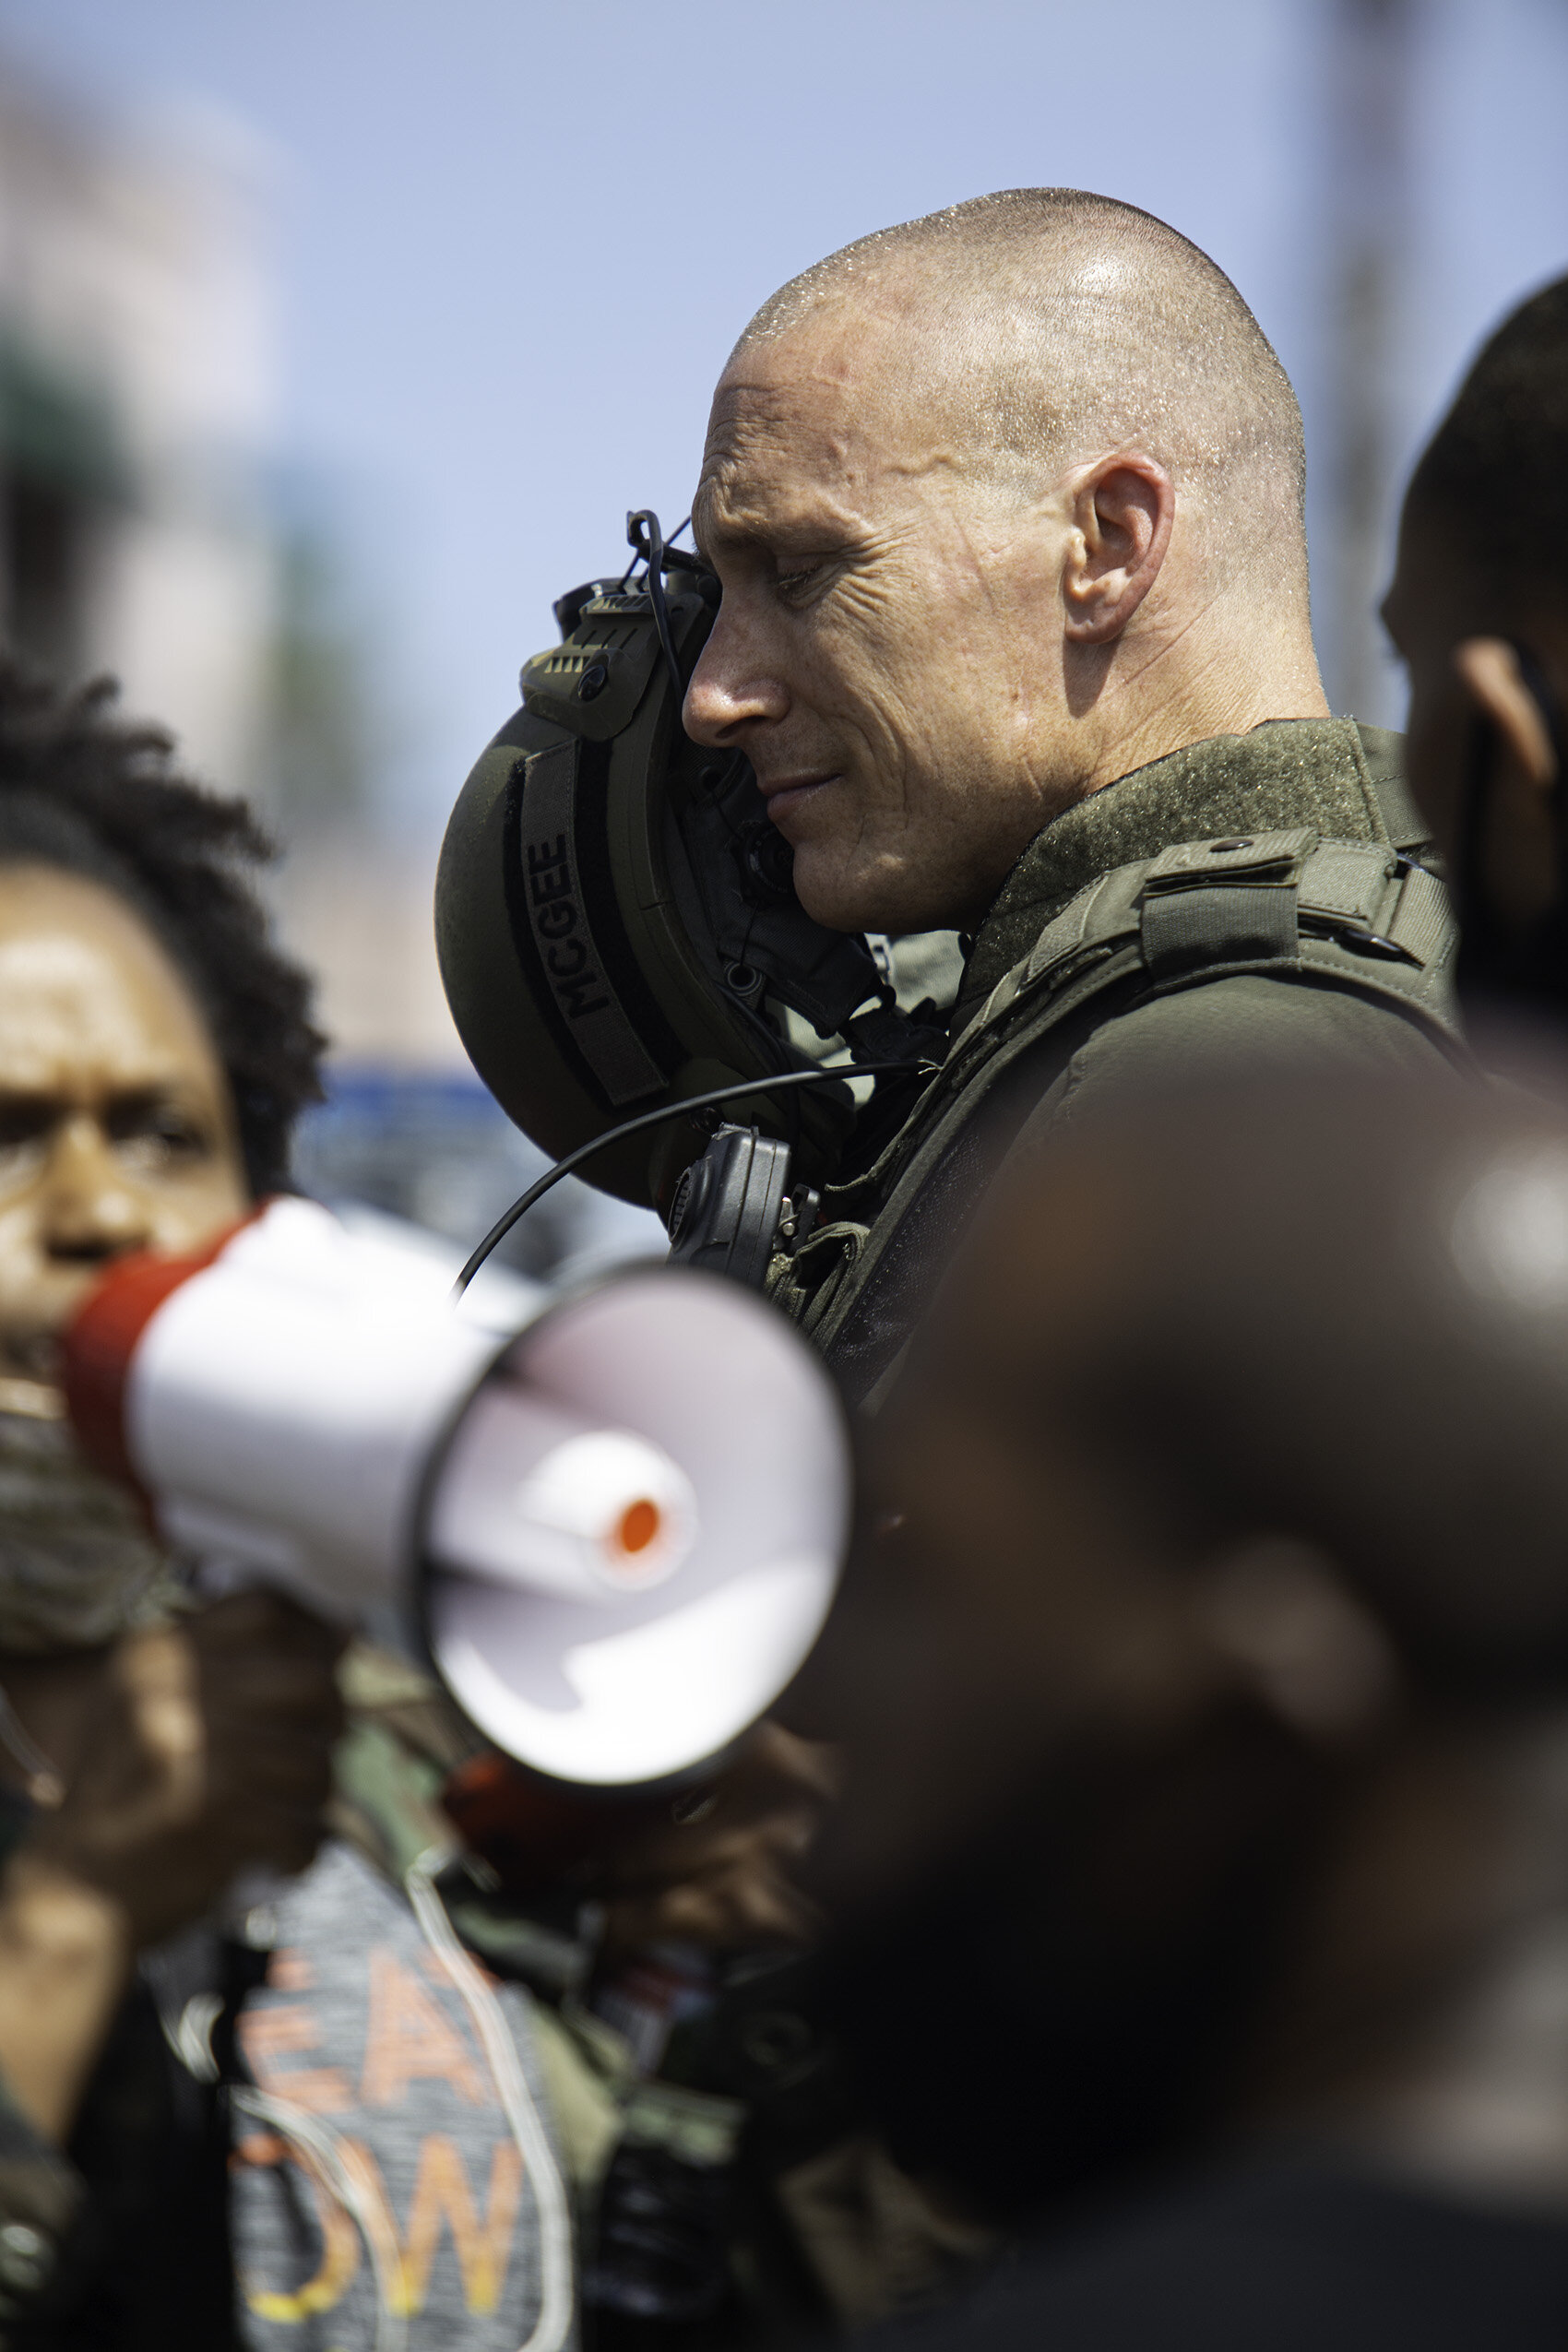  Sgt. Scott McGee of the Santa Monica Police Department removes his helmet and gas mask to talk to protesters during the Black. Lives Matter (BLM) protest on Sunday, May 31, 2020 on Ocean Avenue, in Santa Monica, Calif.  